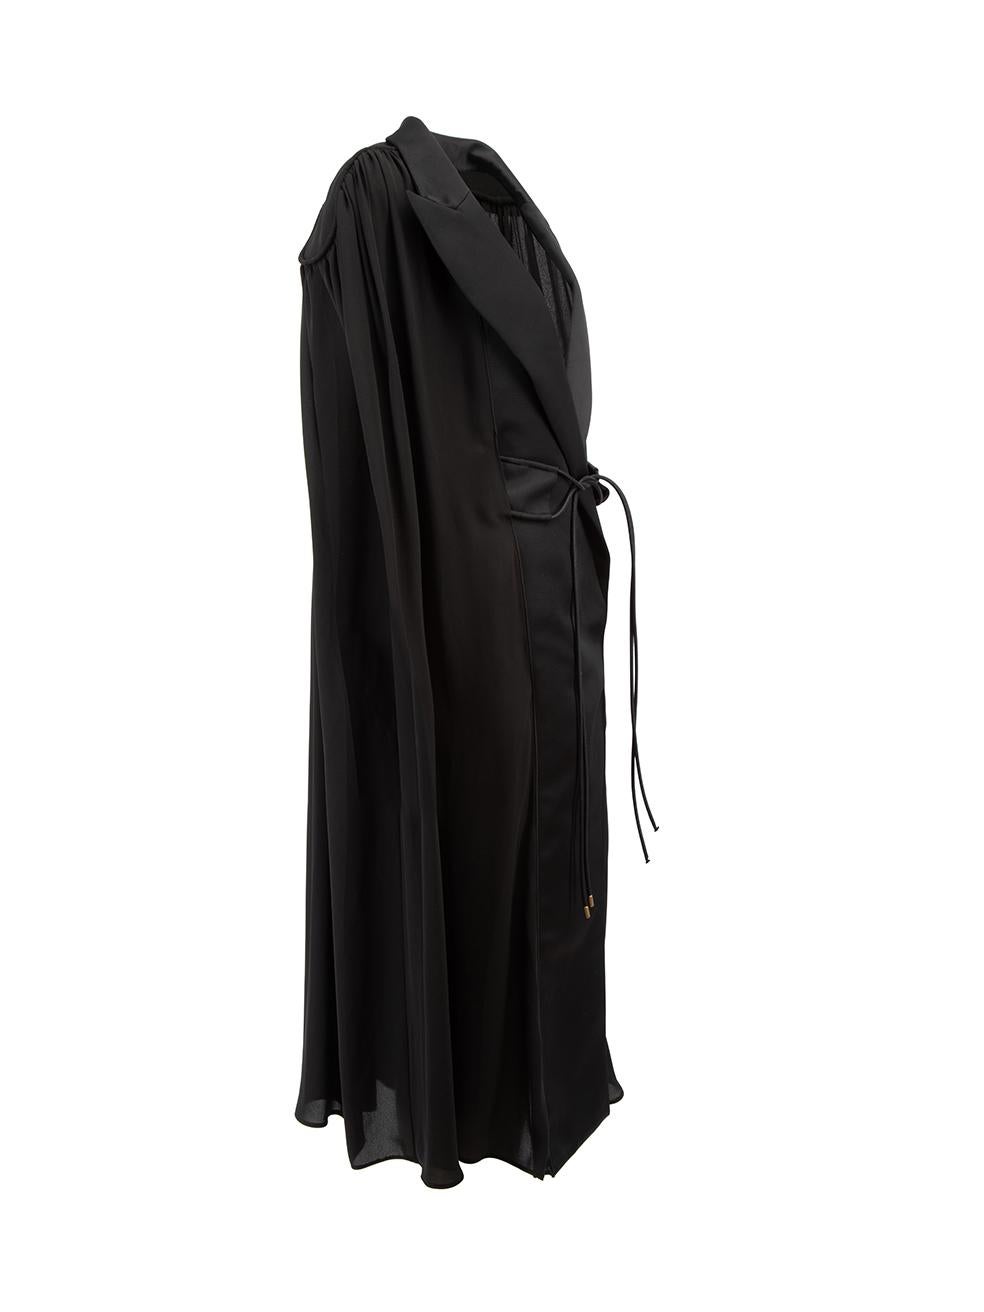 CONDITION is Very good. Minimal wear to cape is evident where missing gold tone tabs on 2 of the belt strings can be seen on this used Maison Rabih Kayrouz designer resale item. 



Details


Black

Polyester

Long cape

Lace up wide